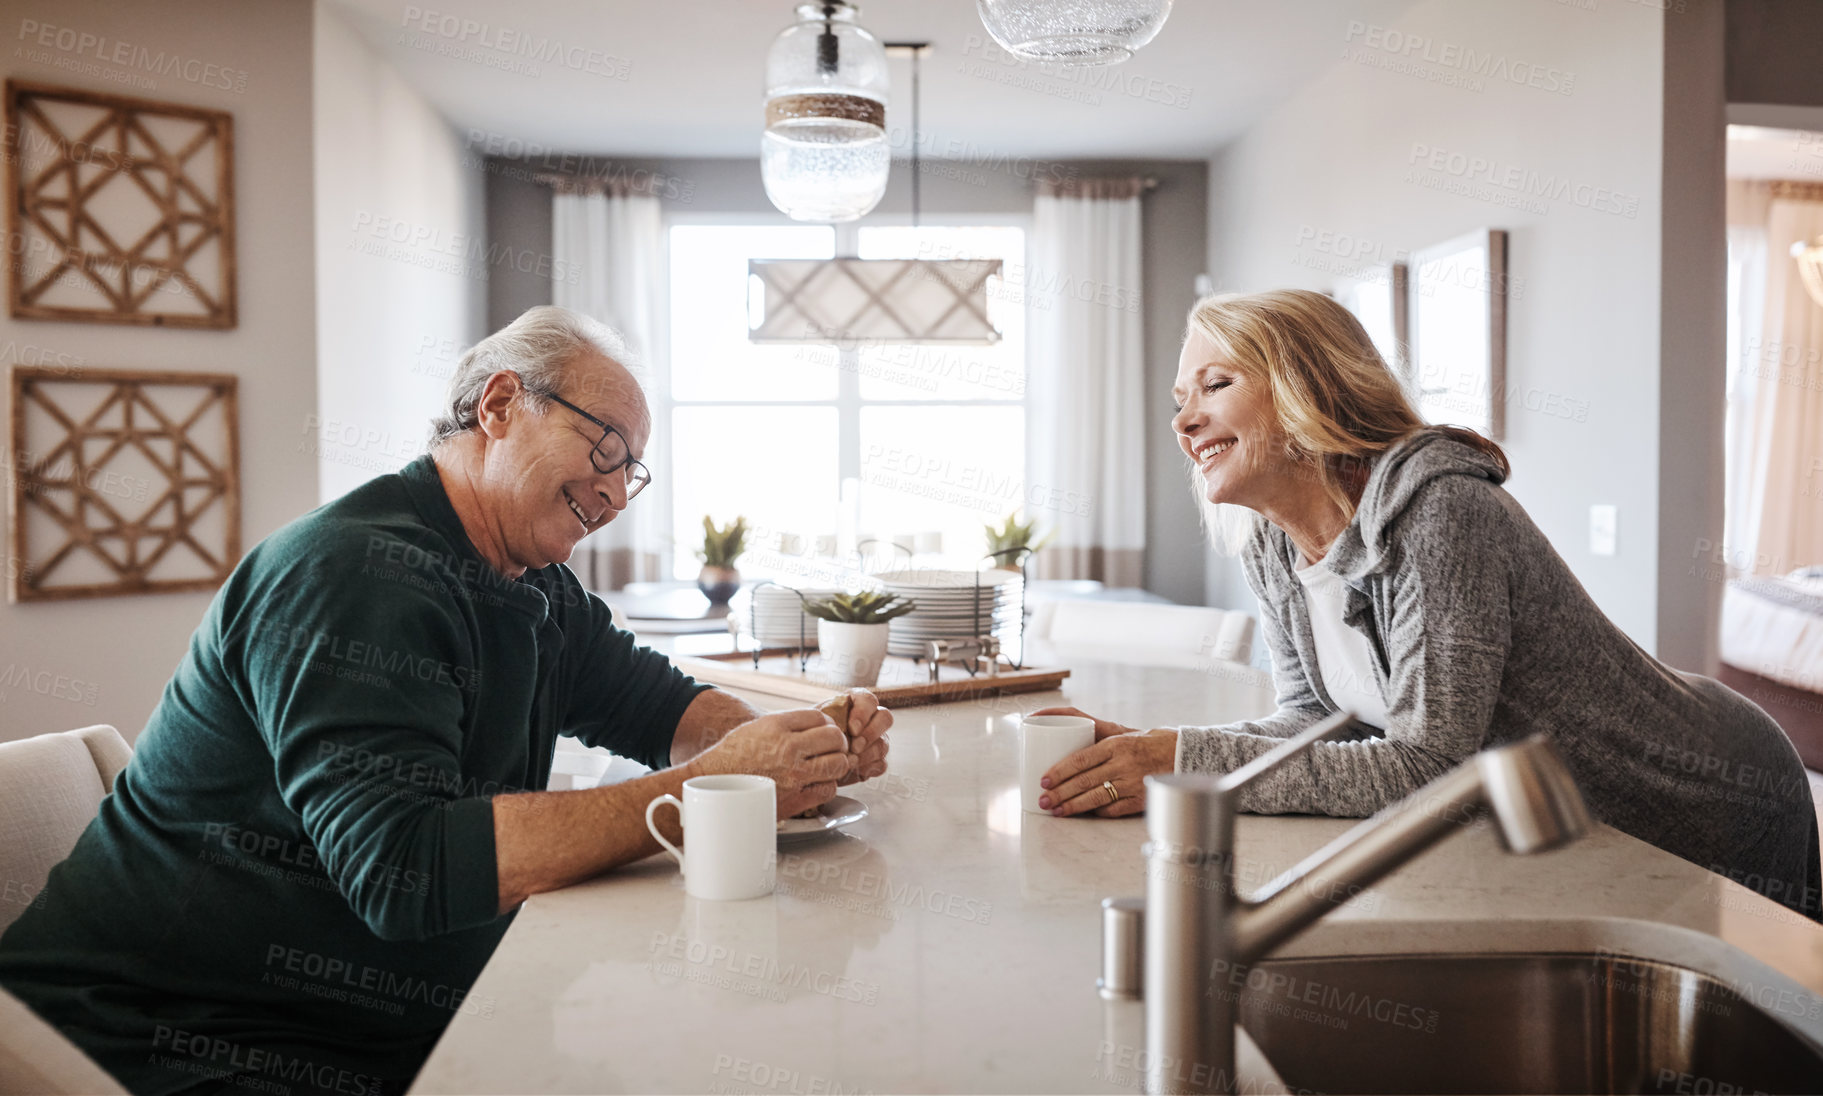 Buy stock photo Shot of a mature couple having coffee and a snack during a relaxed day at home